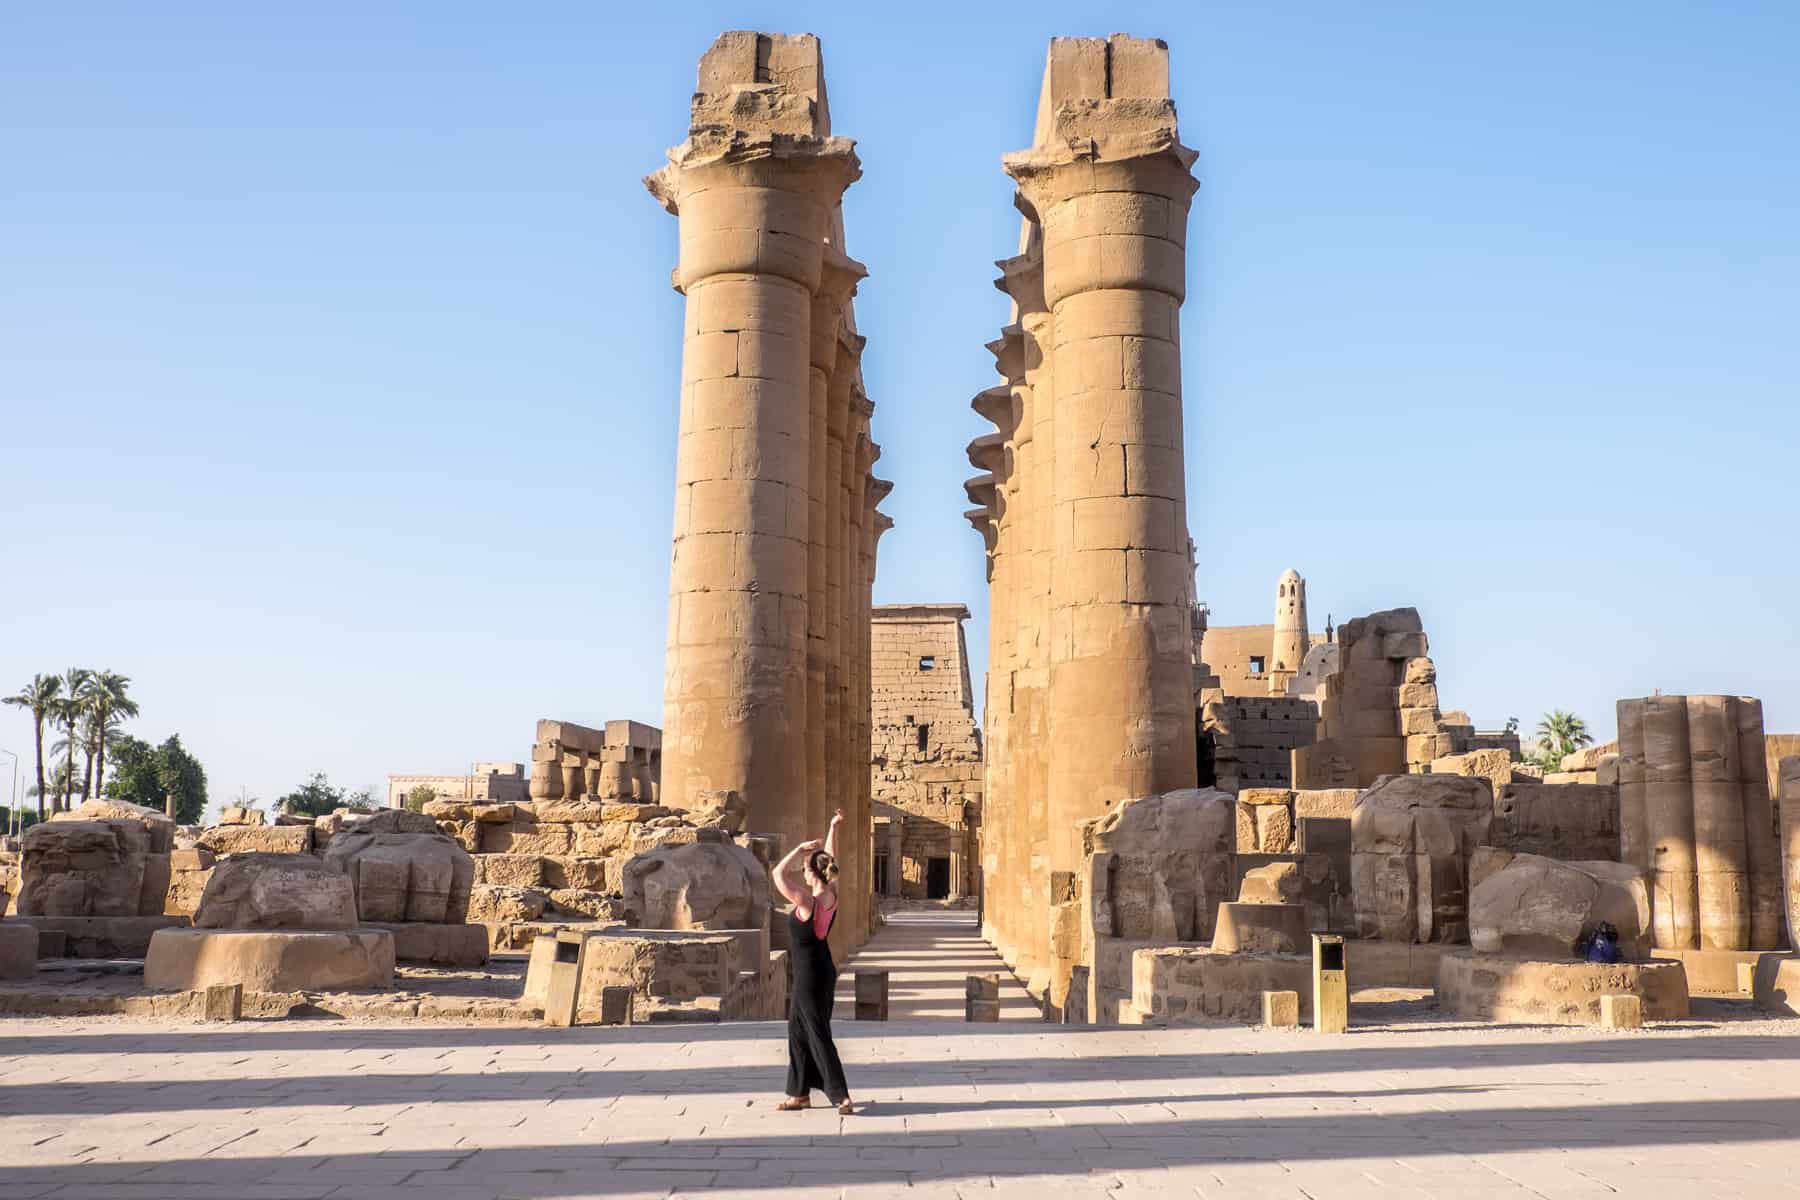 A woman dances in front of a row of tall columns at the Luxor Temple site in Egypt